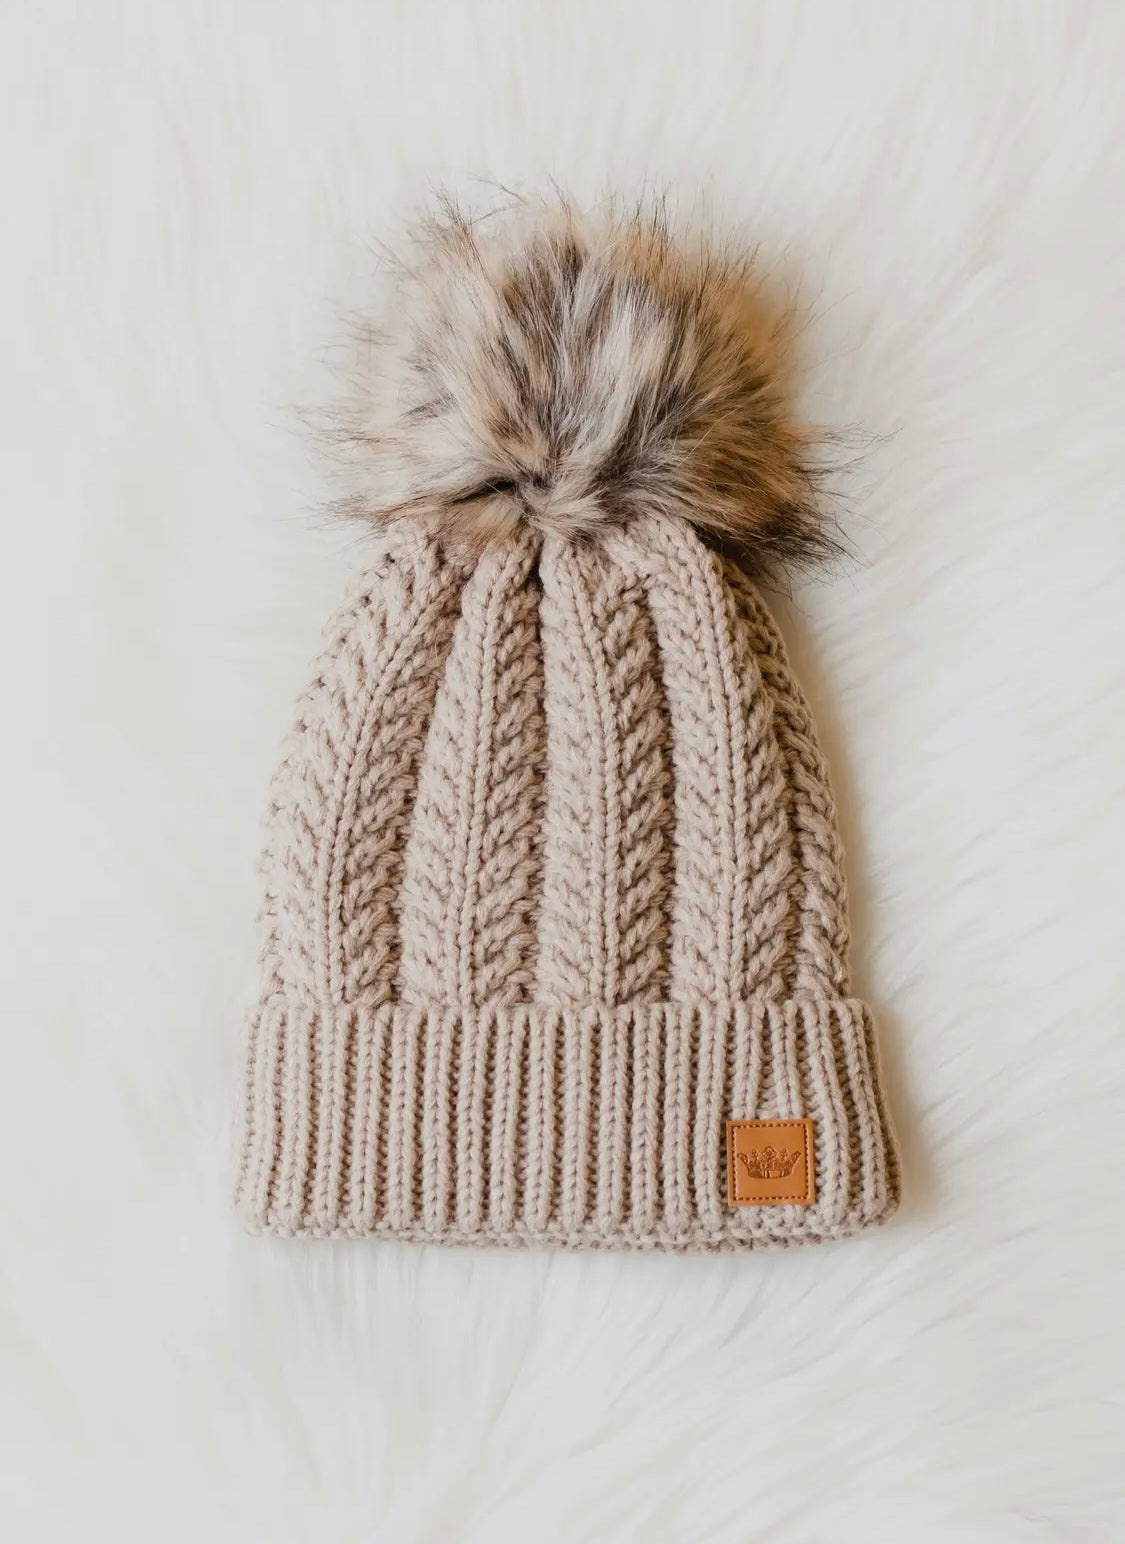 Tan cable knit Pom hat